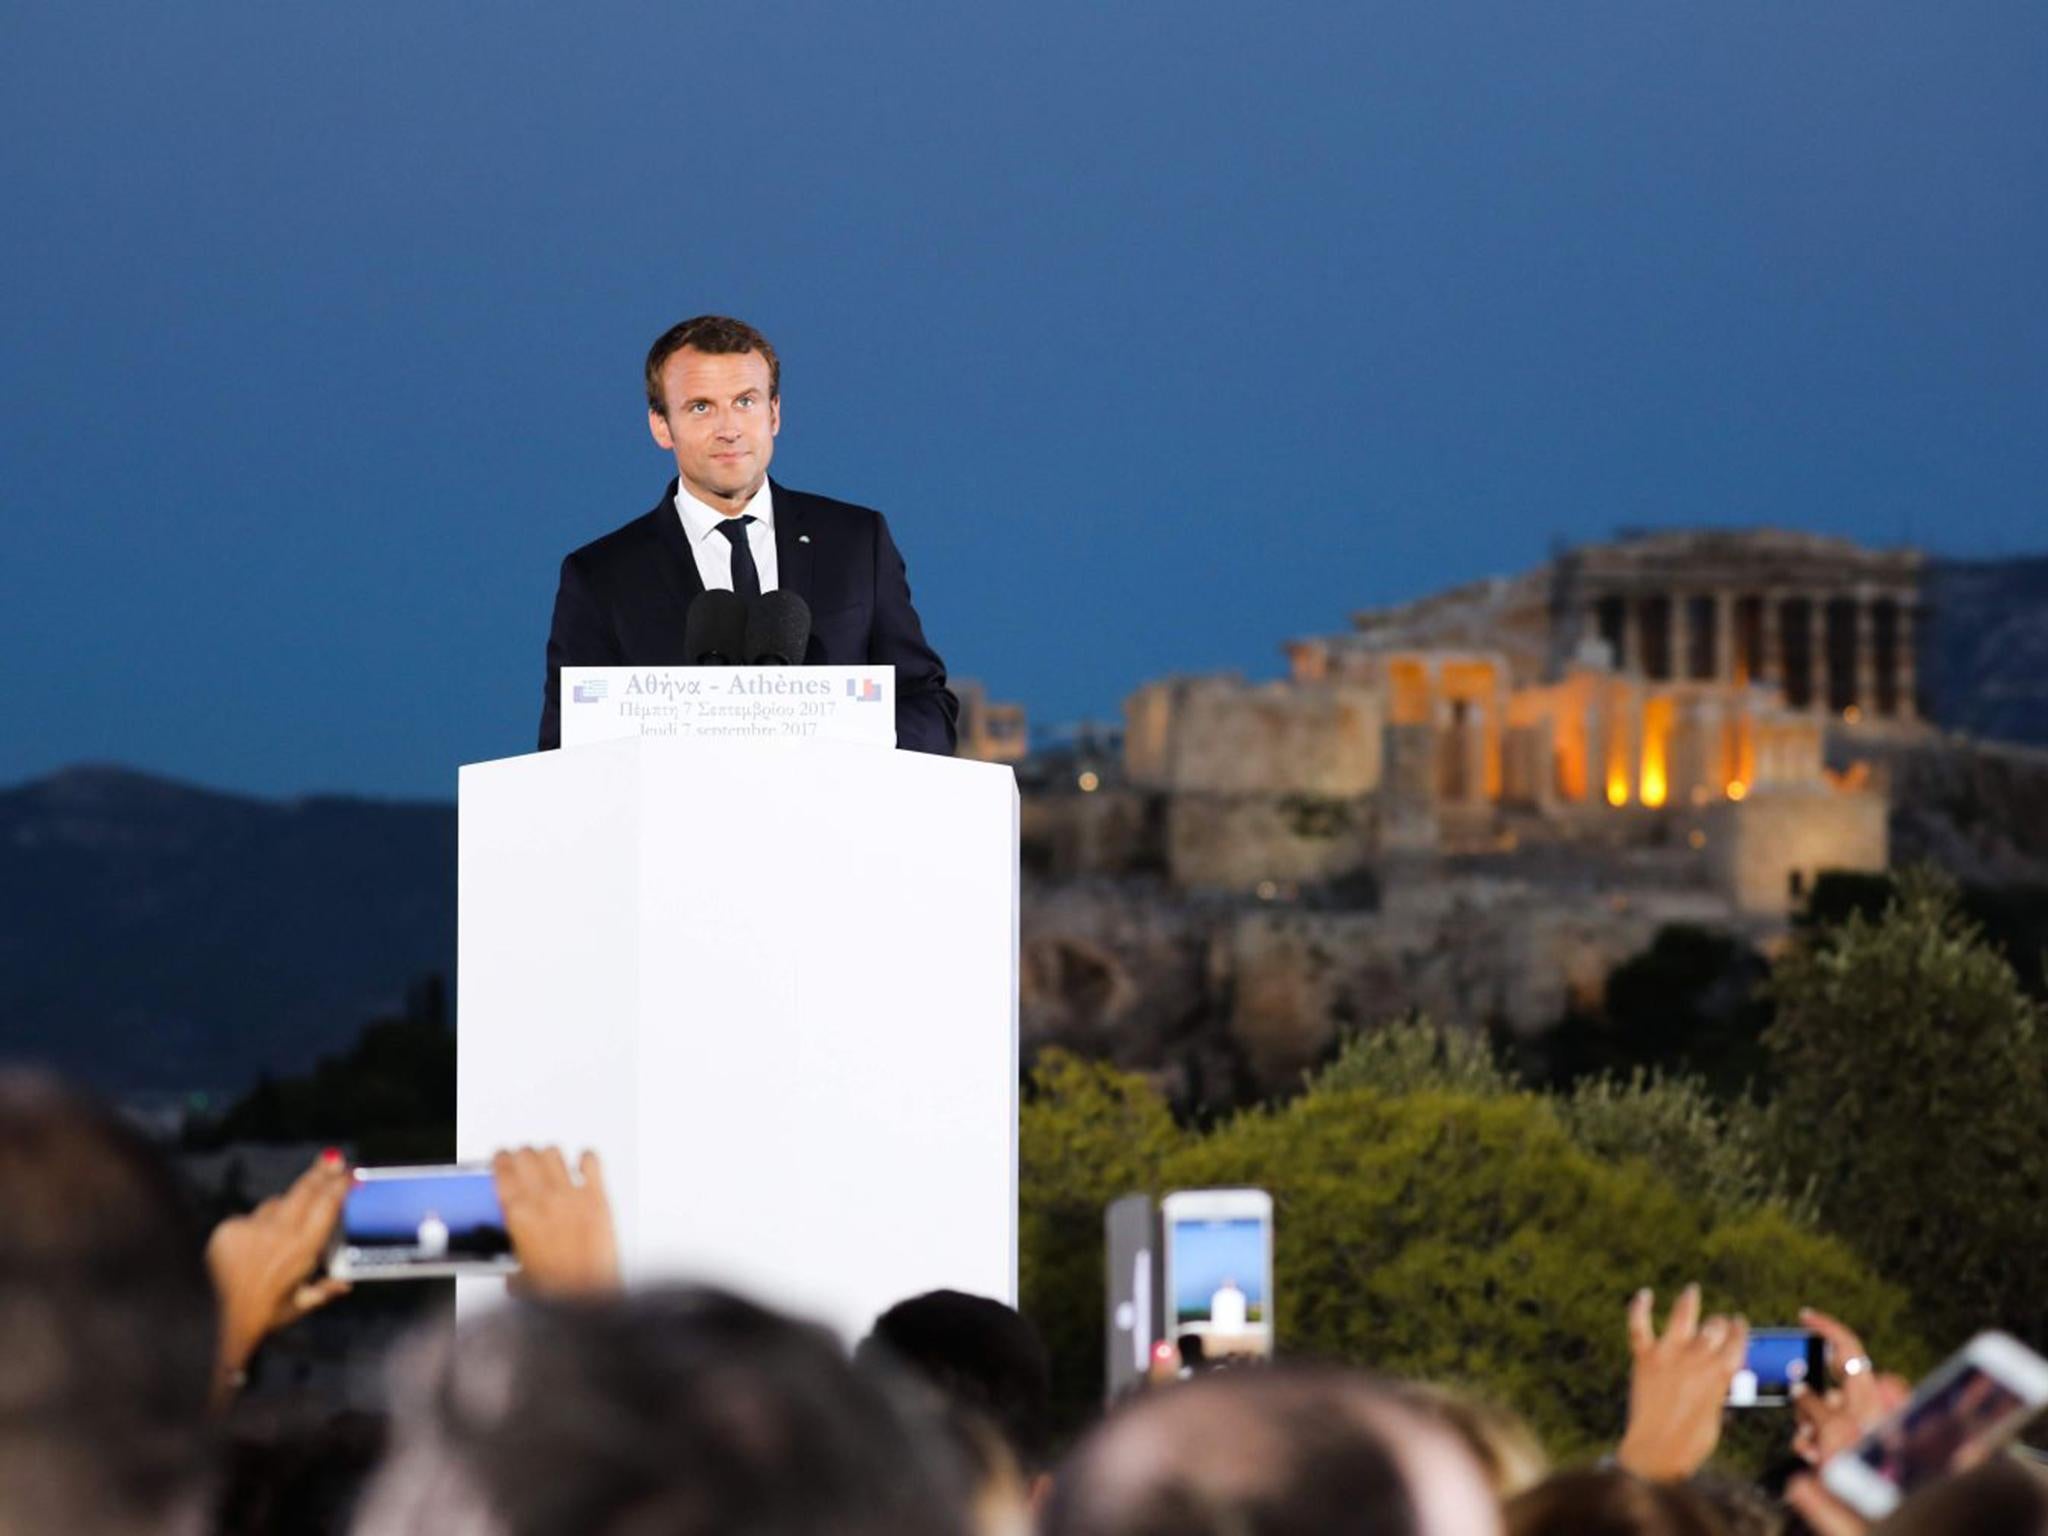 French President Emmanuel Macron reacts after delivering a speech on the Pnyx hill in Athens